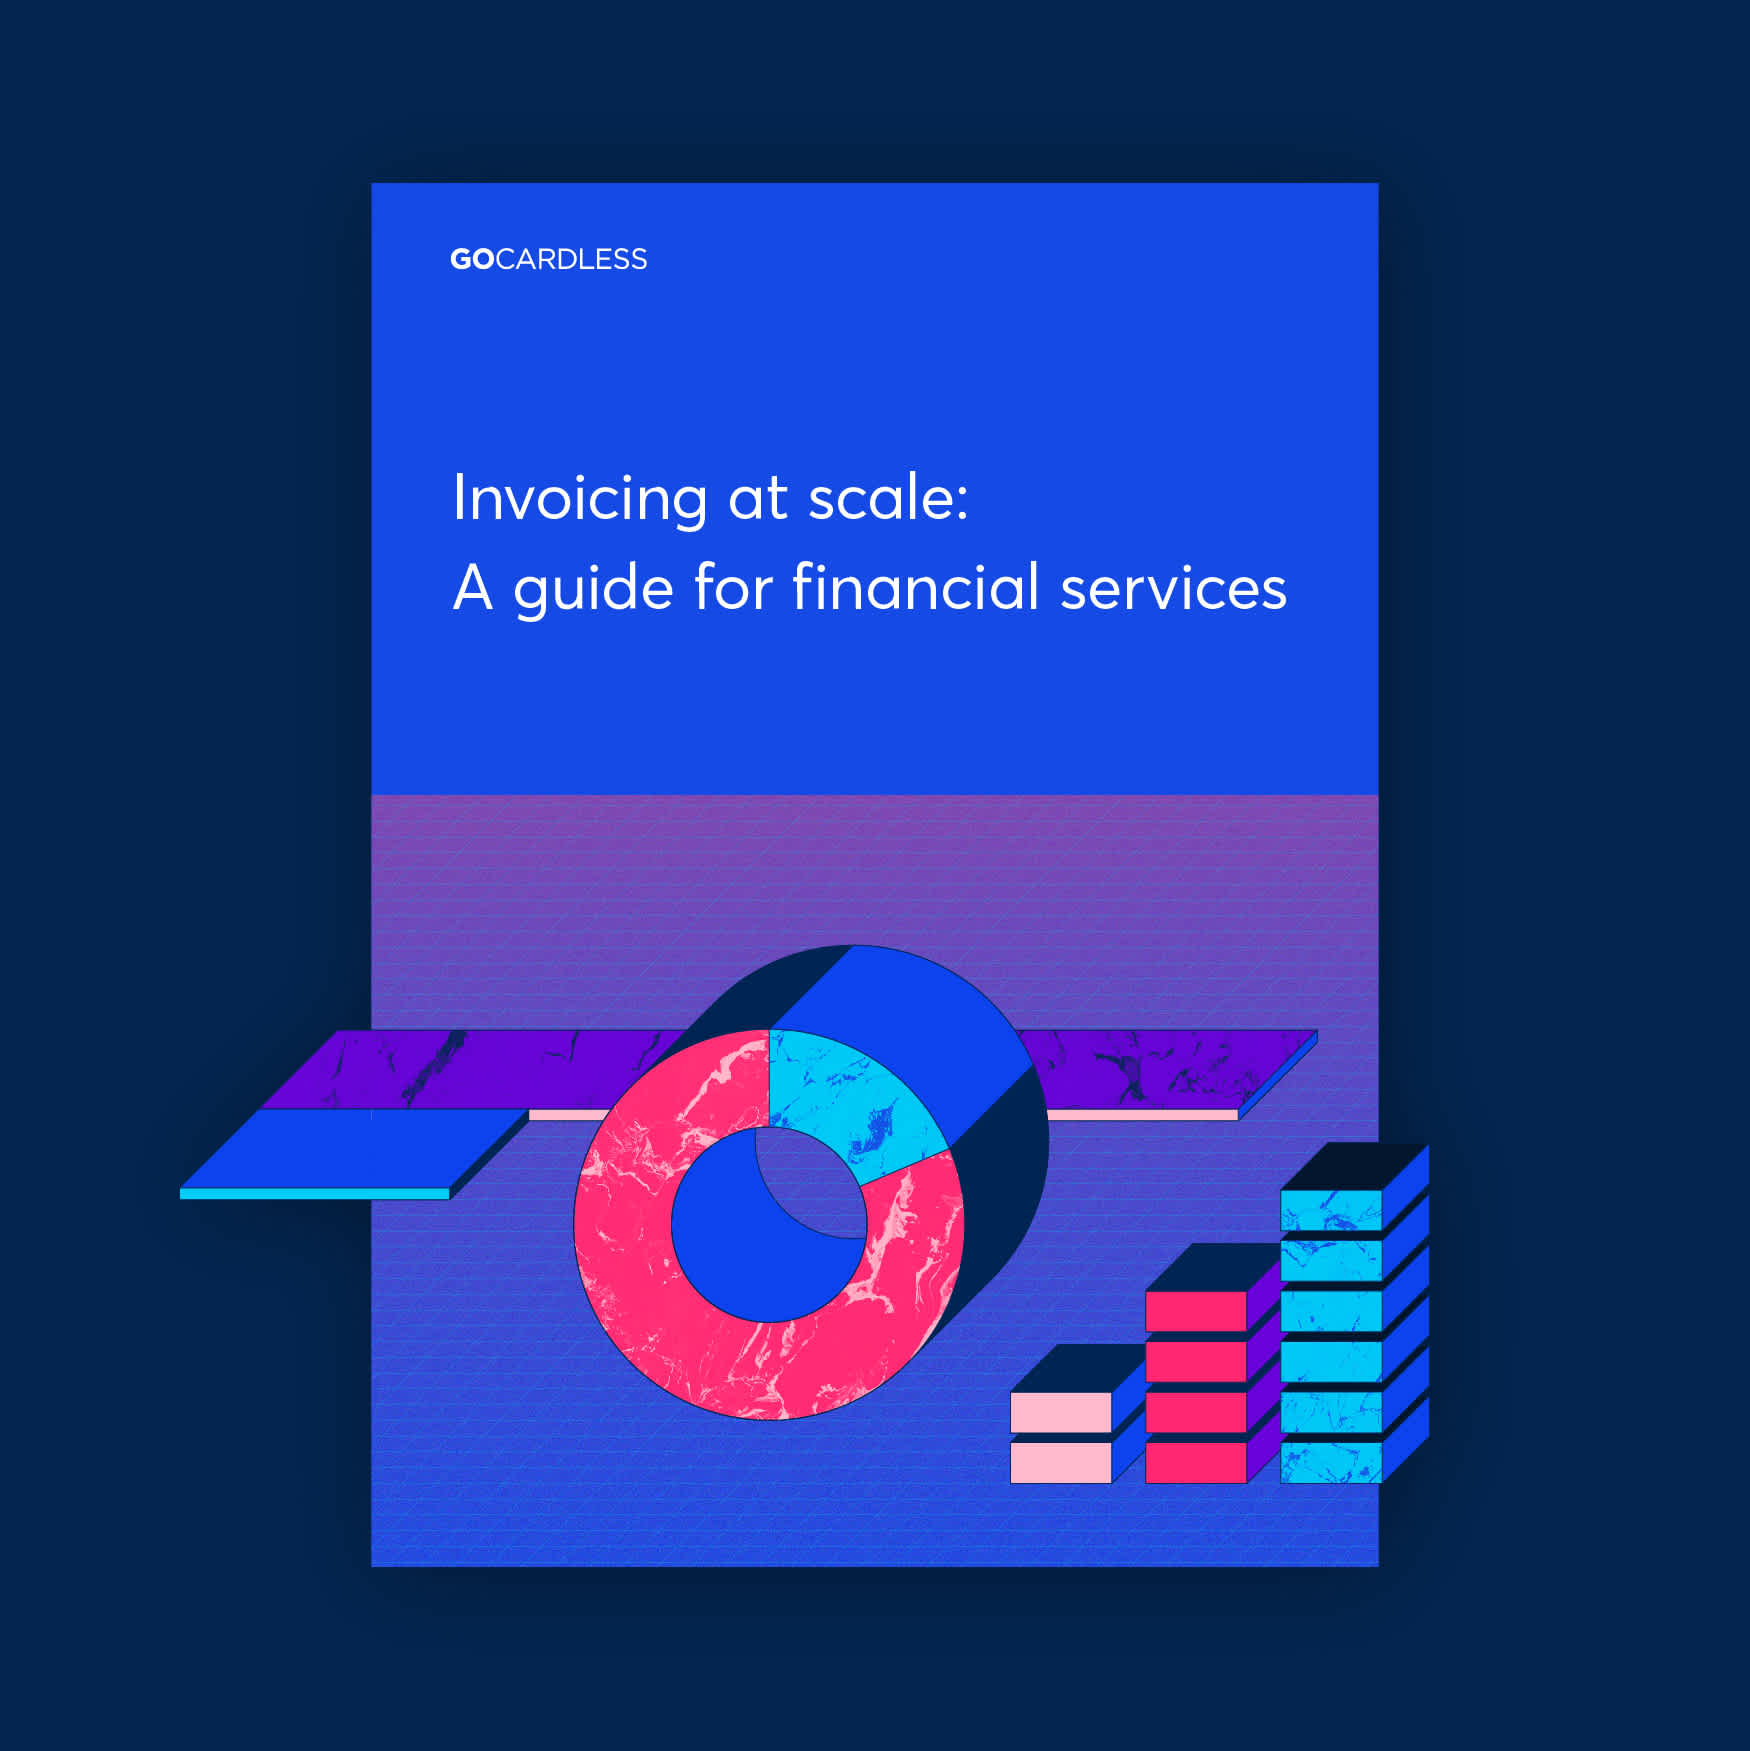 Invoicing at scale: A guide for financial services